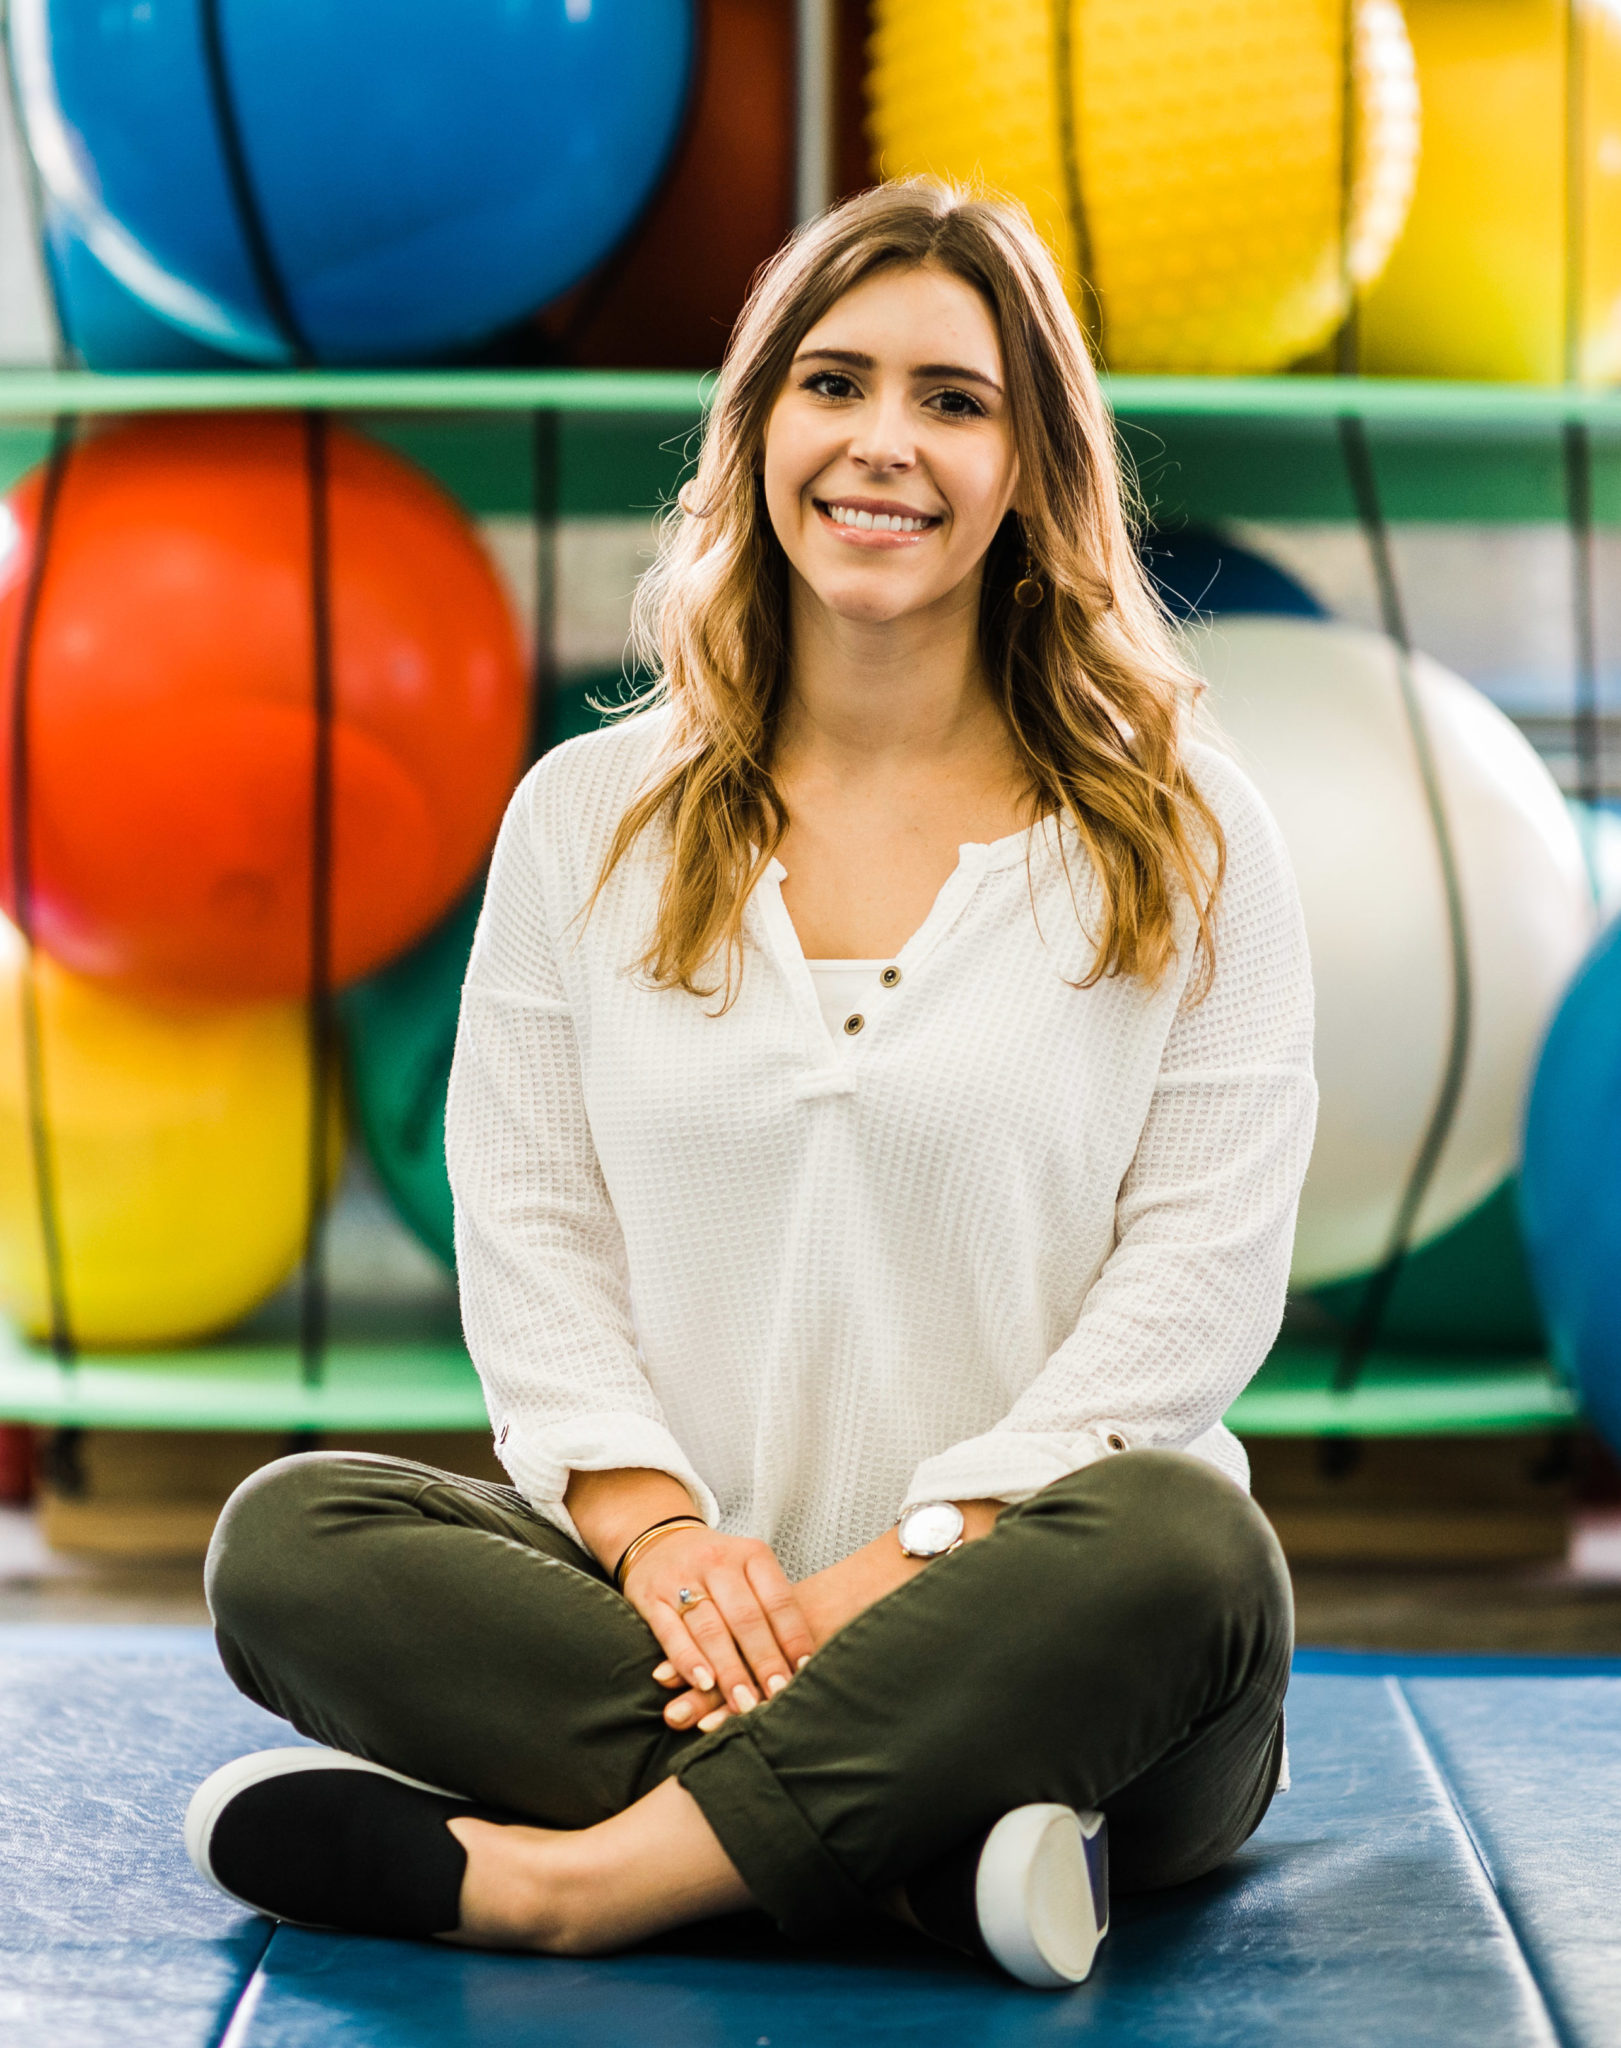 Rachel Keen, therapy aide, wearing a white top with olive pants sitting in the sensory gym